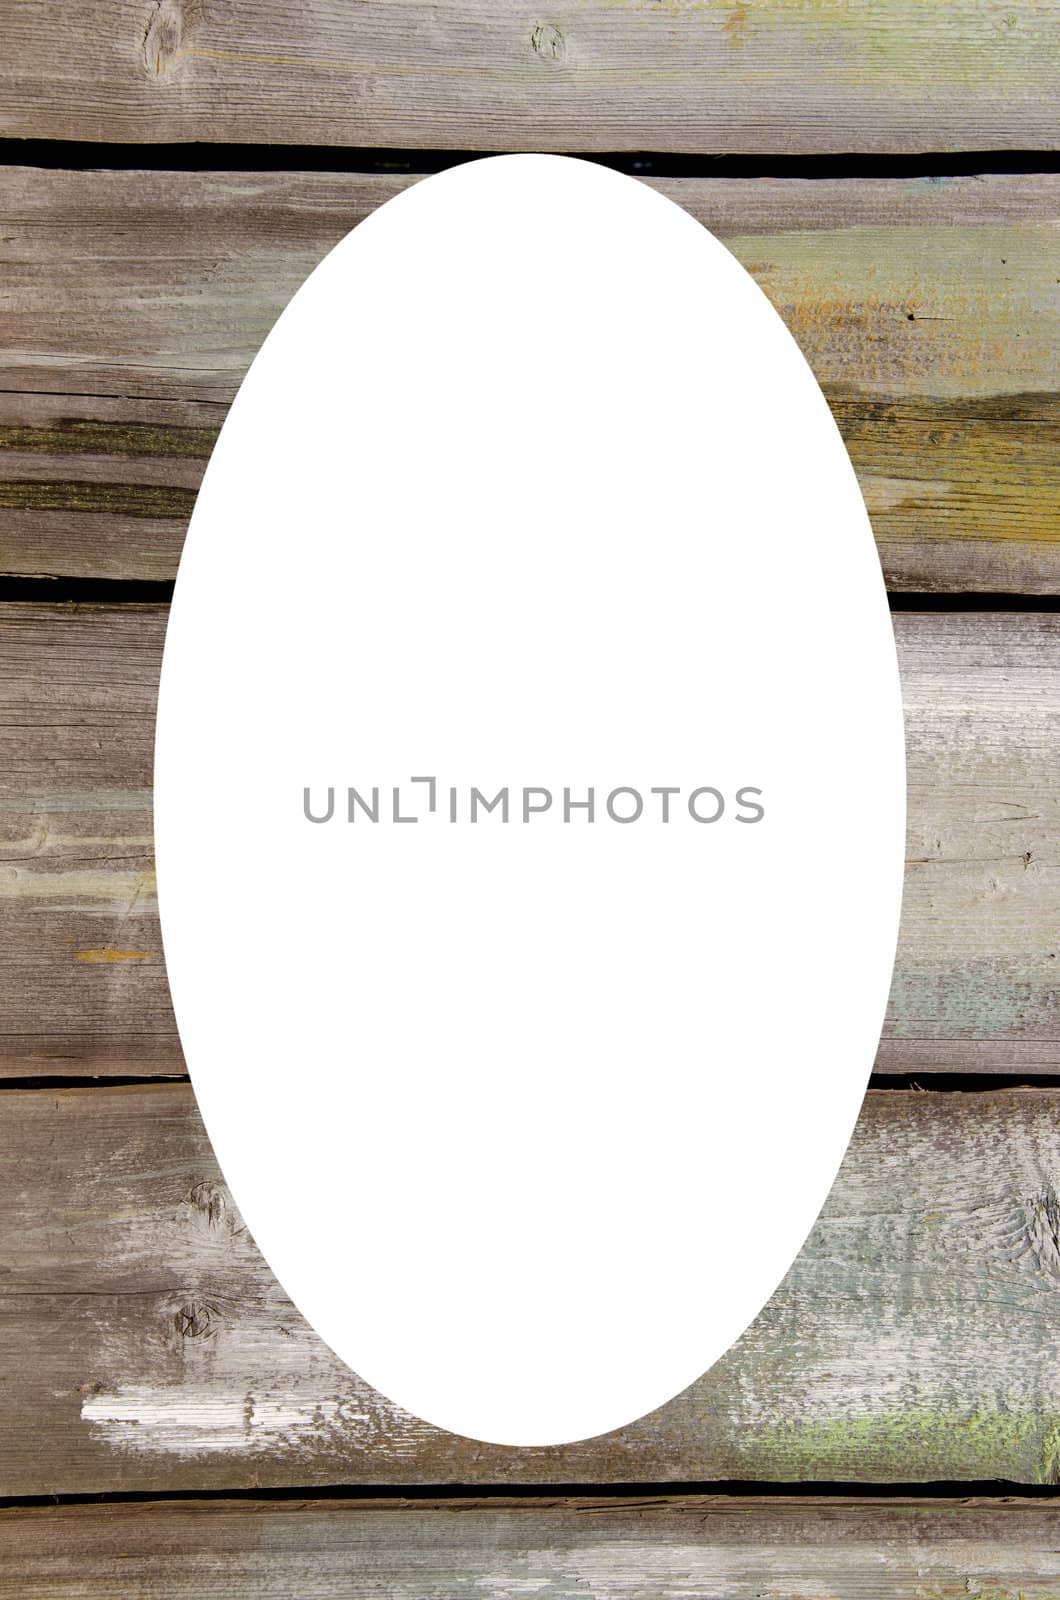 Abandoned wooden wall and white oval in center by sauletas